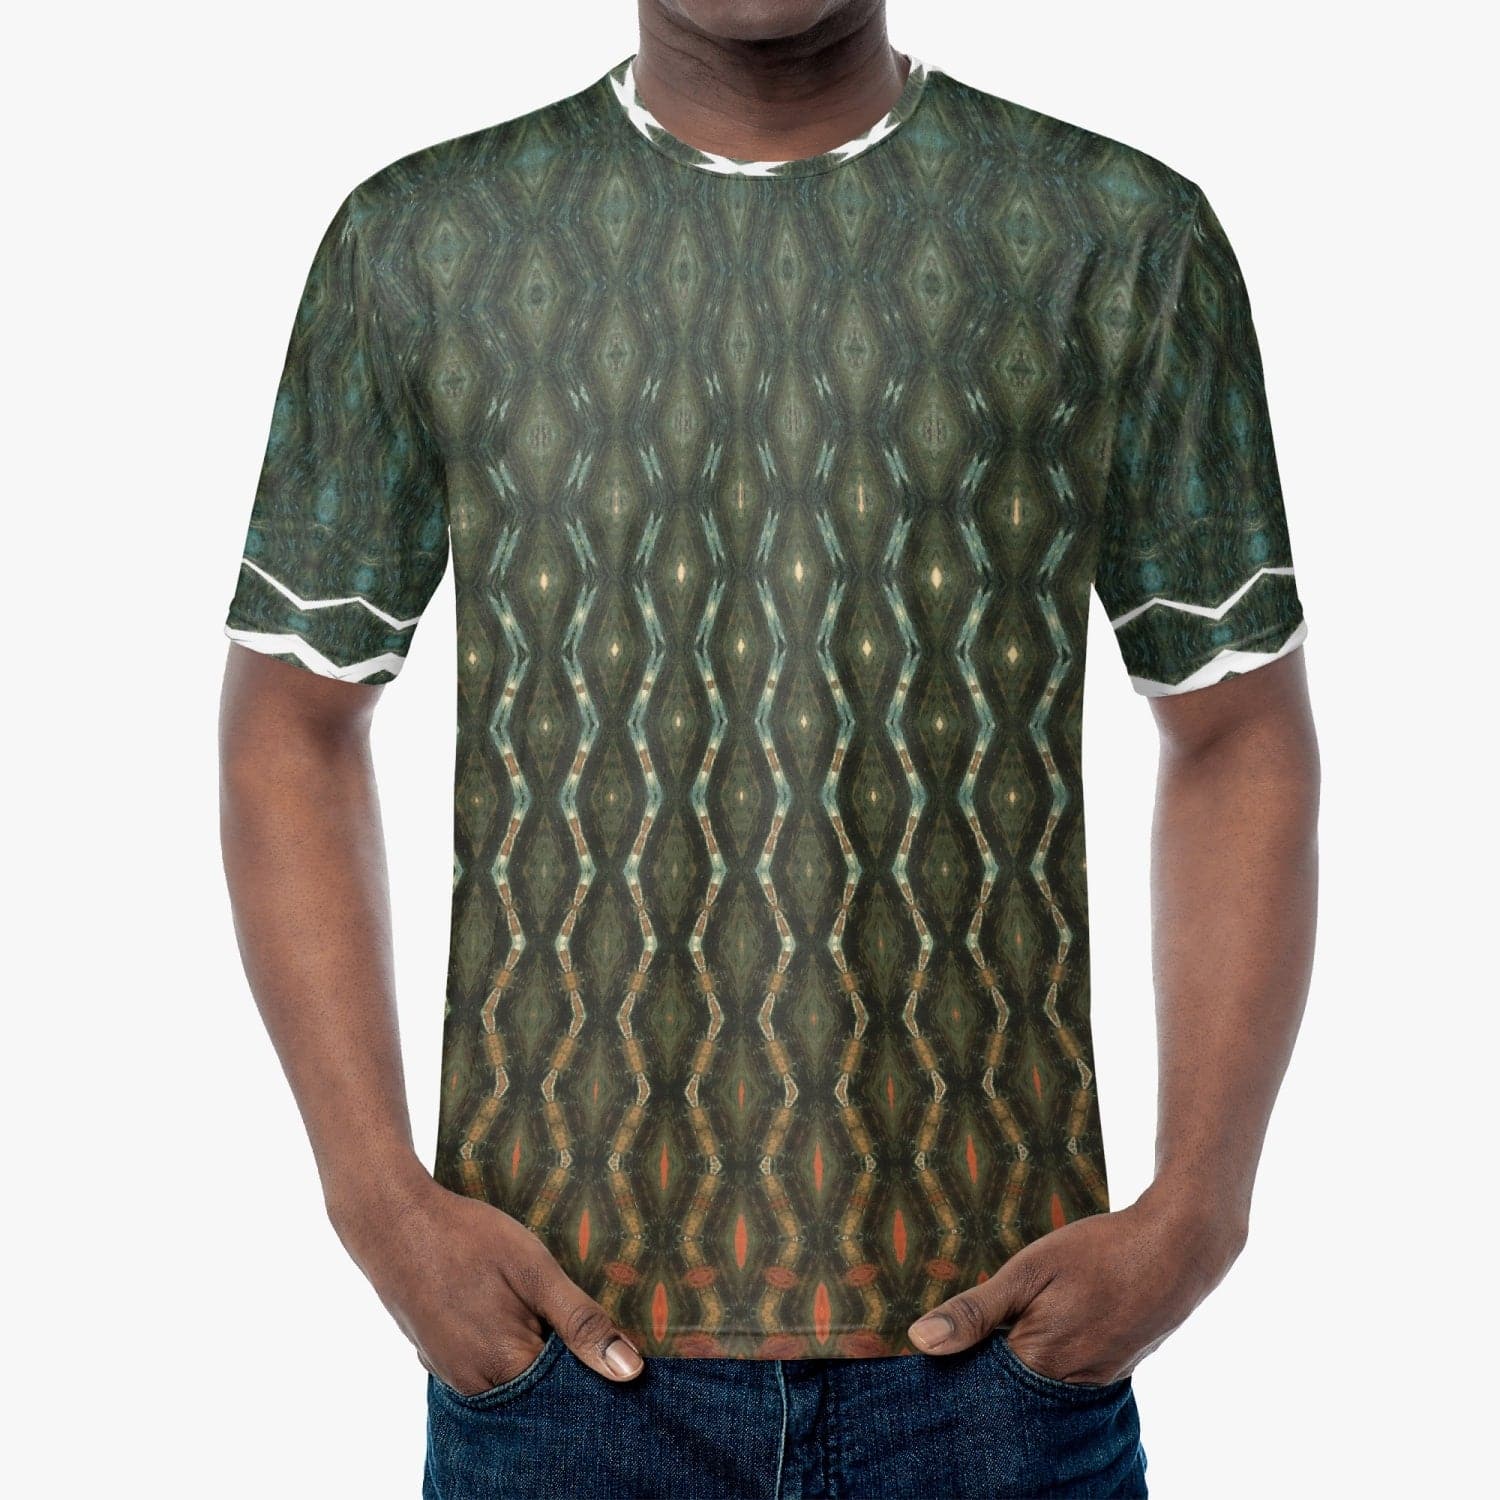 Green Patterned Handmade T-shirt with Orange and White Elements